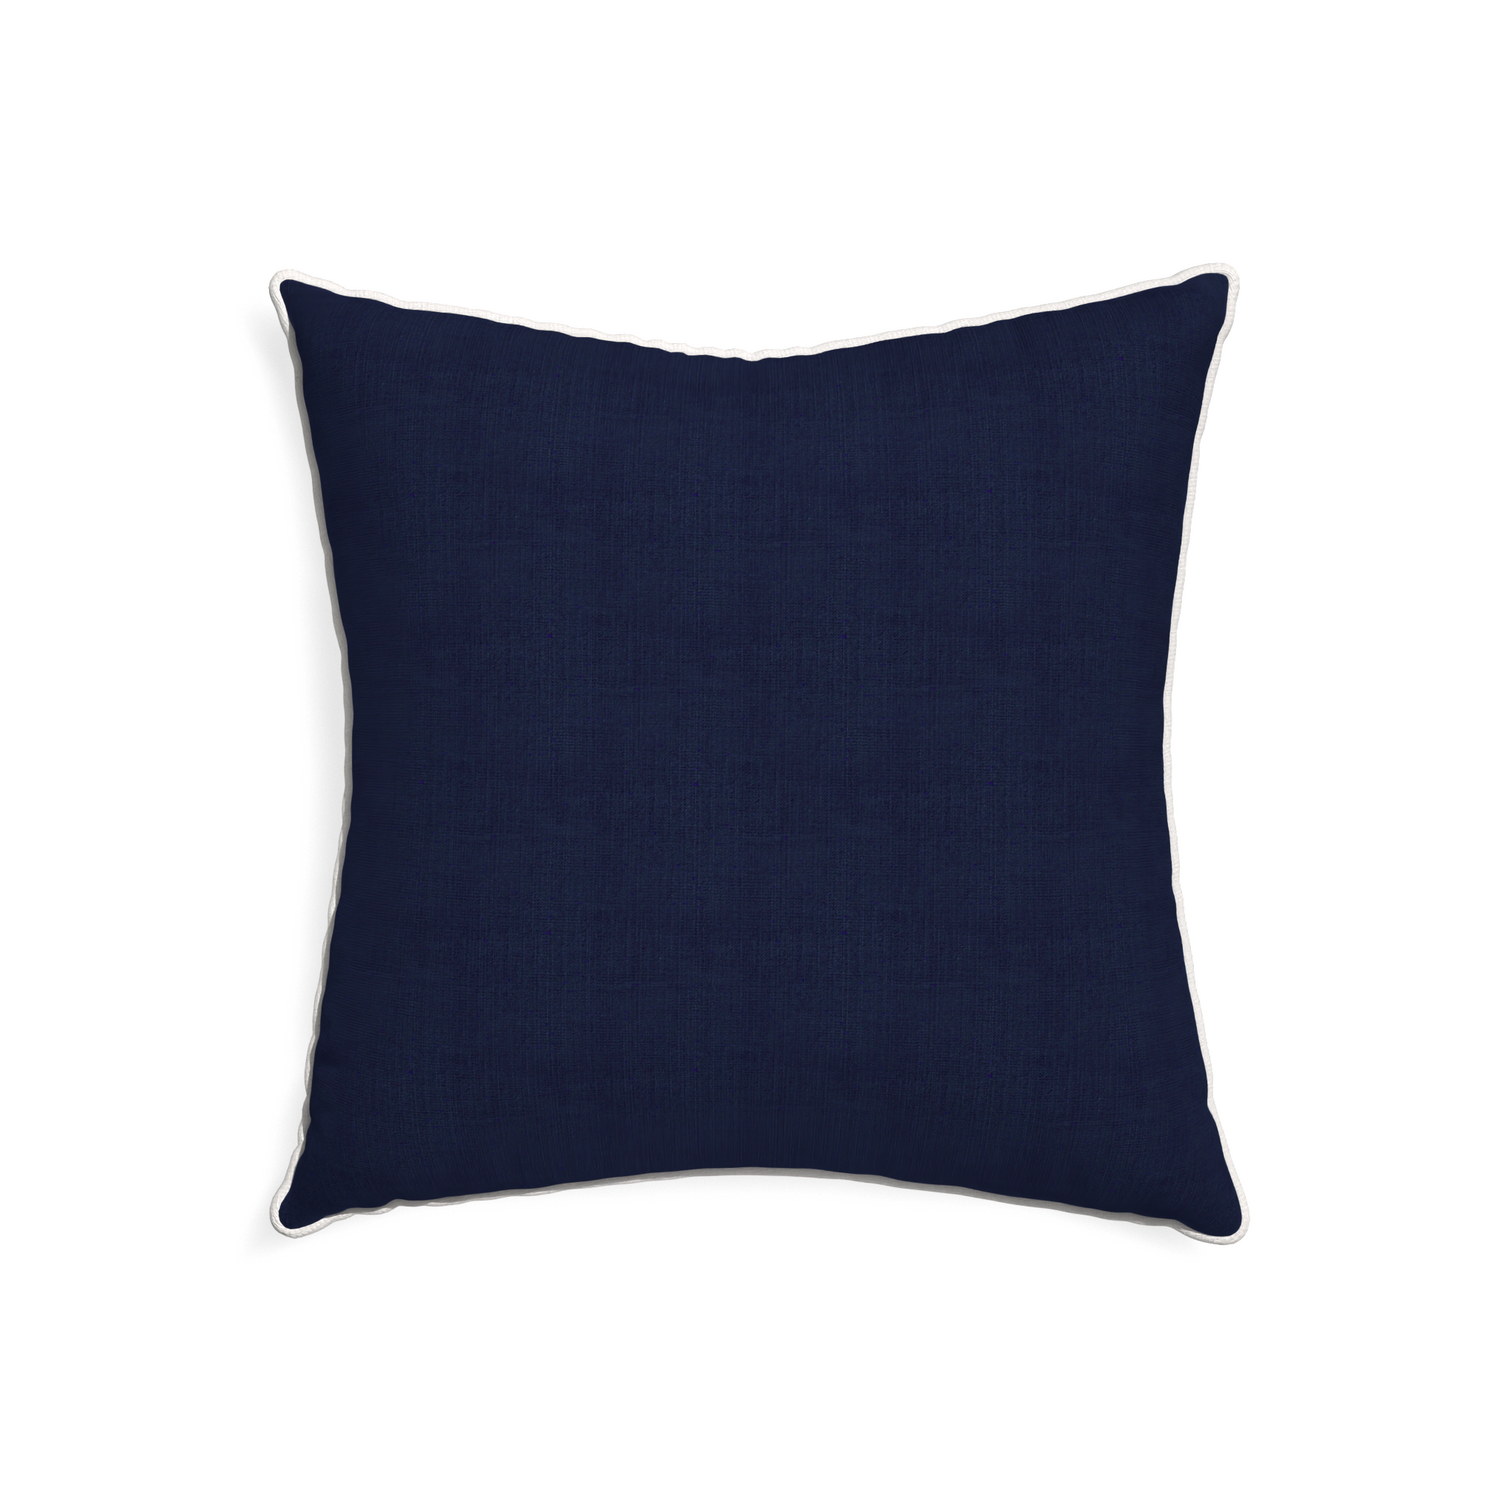 22-square midnight custom pillow with snow piping on white background